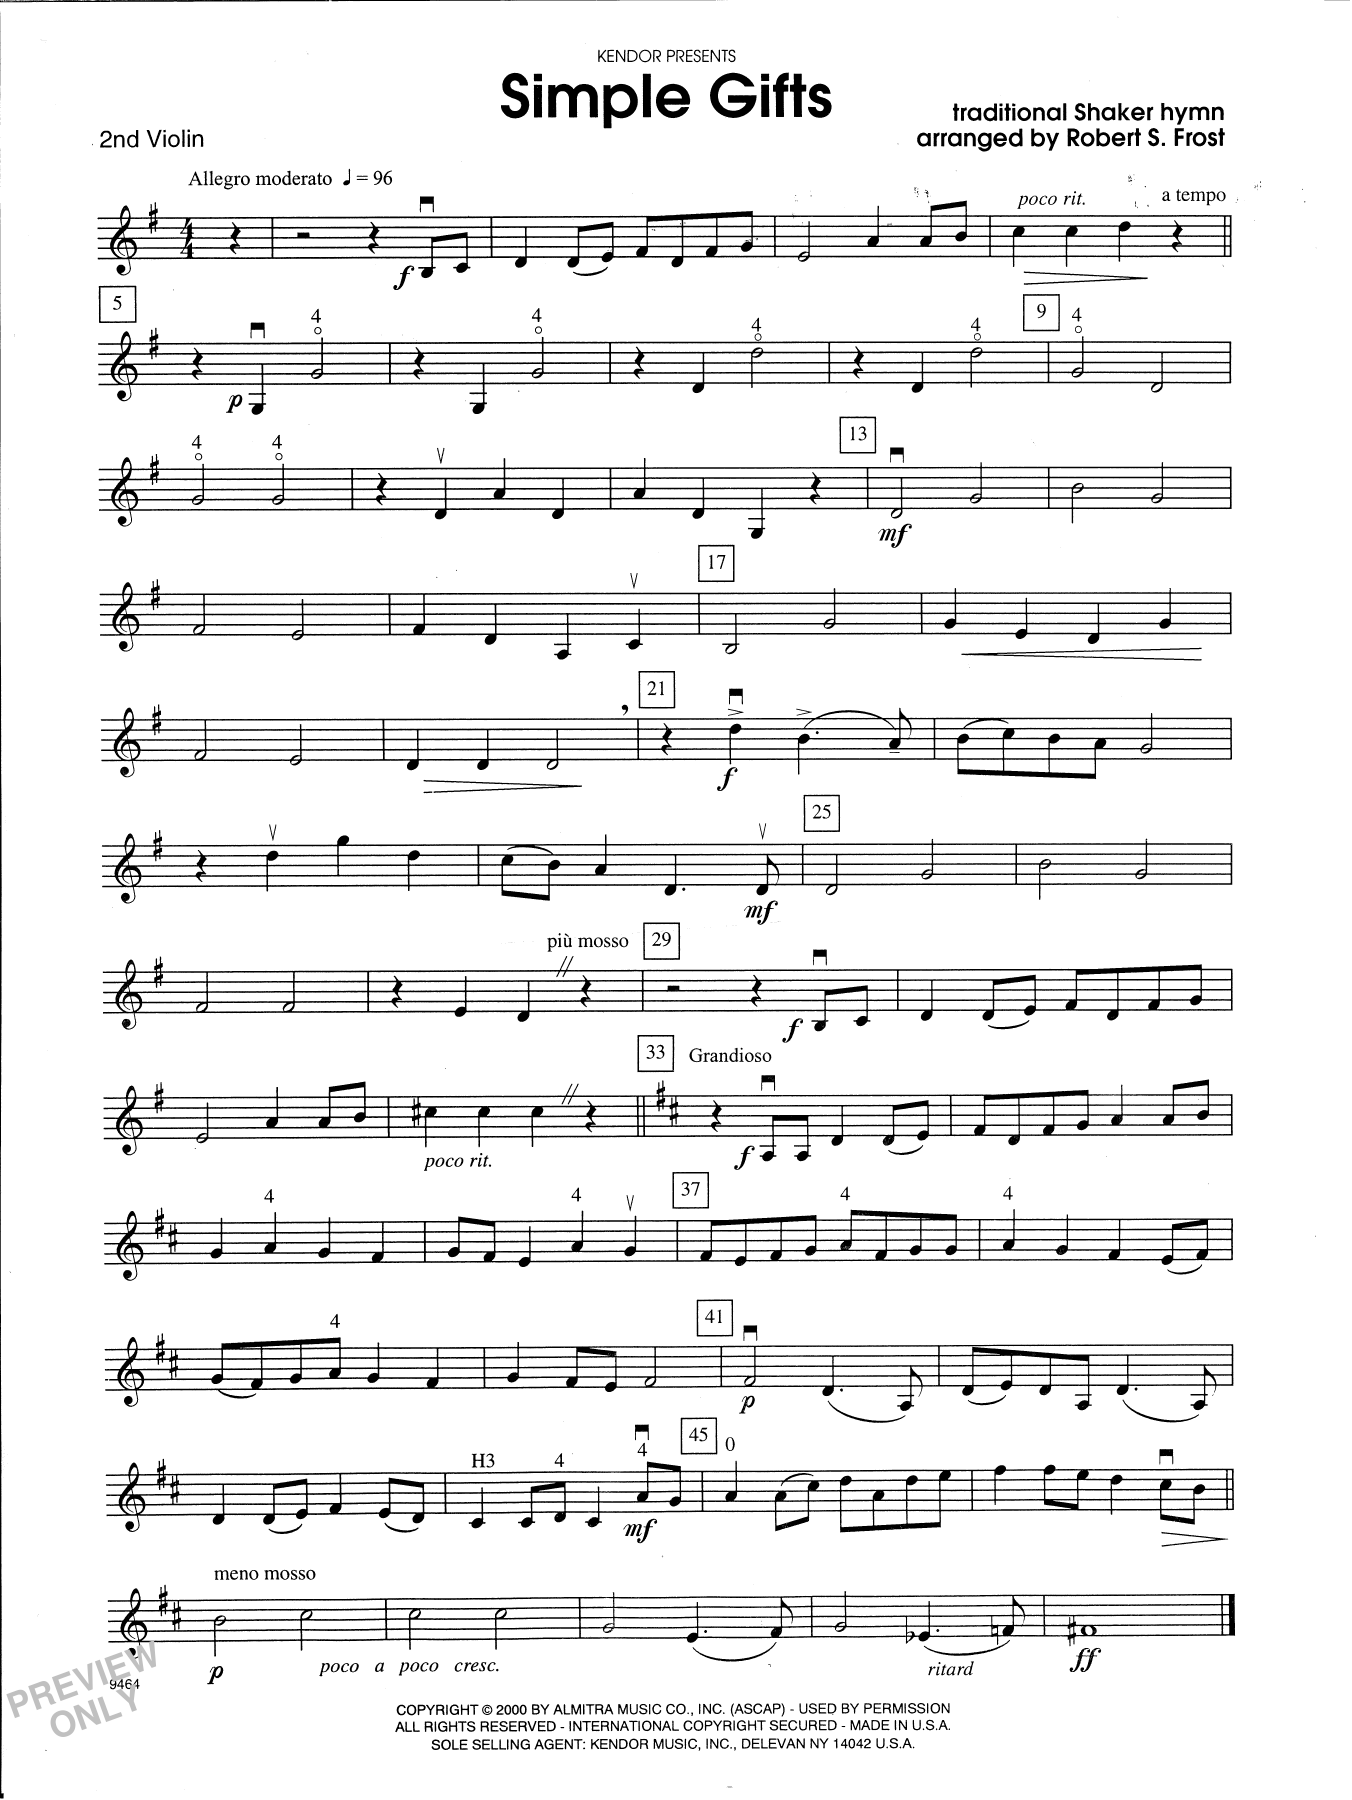 Download Robert S. Frost Simple Gifts - 2nd Violin Sheet Music